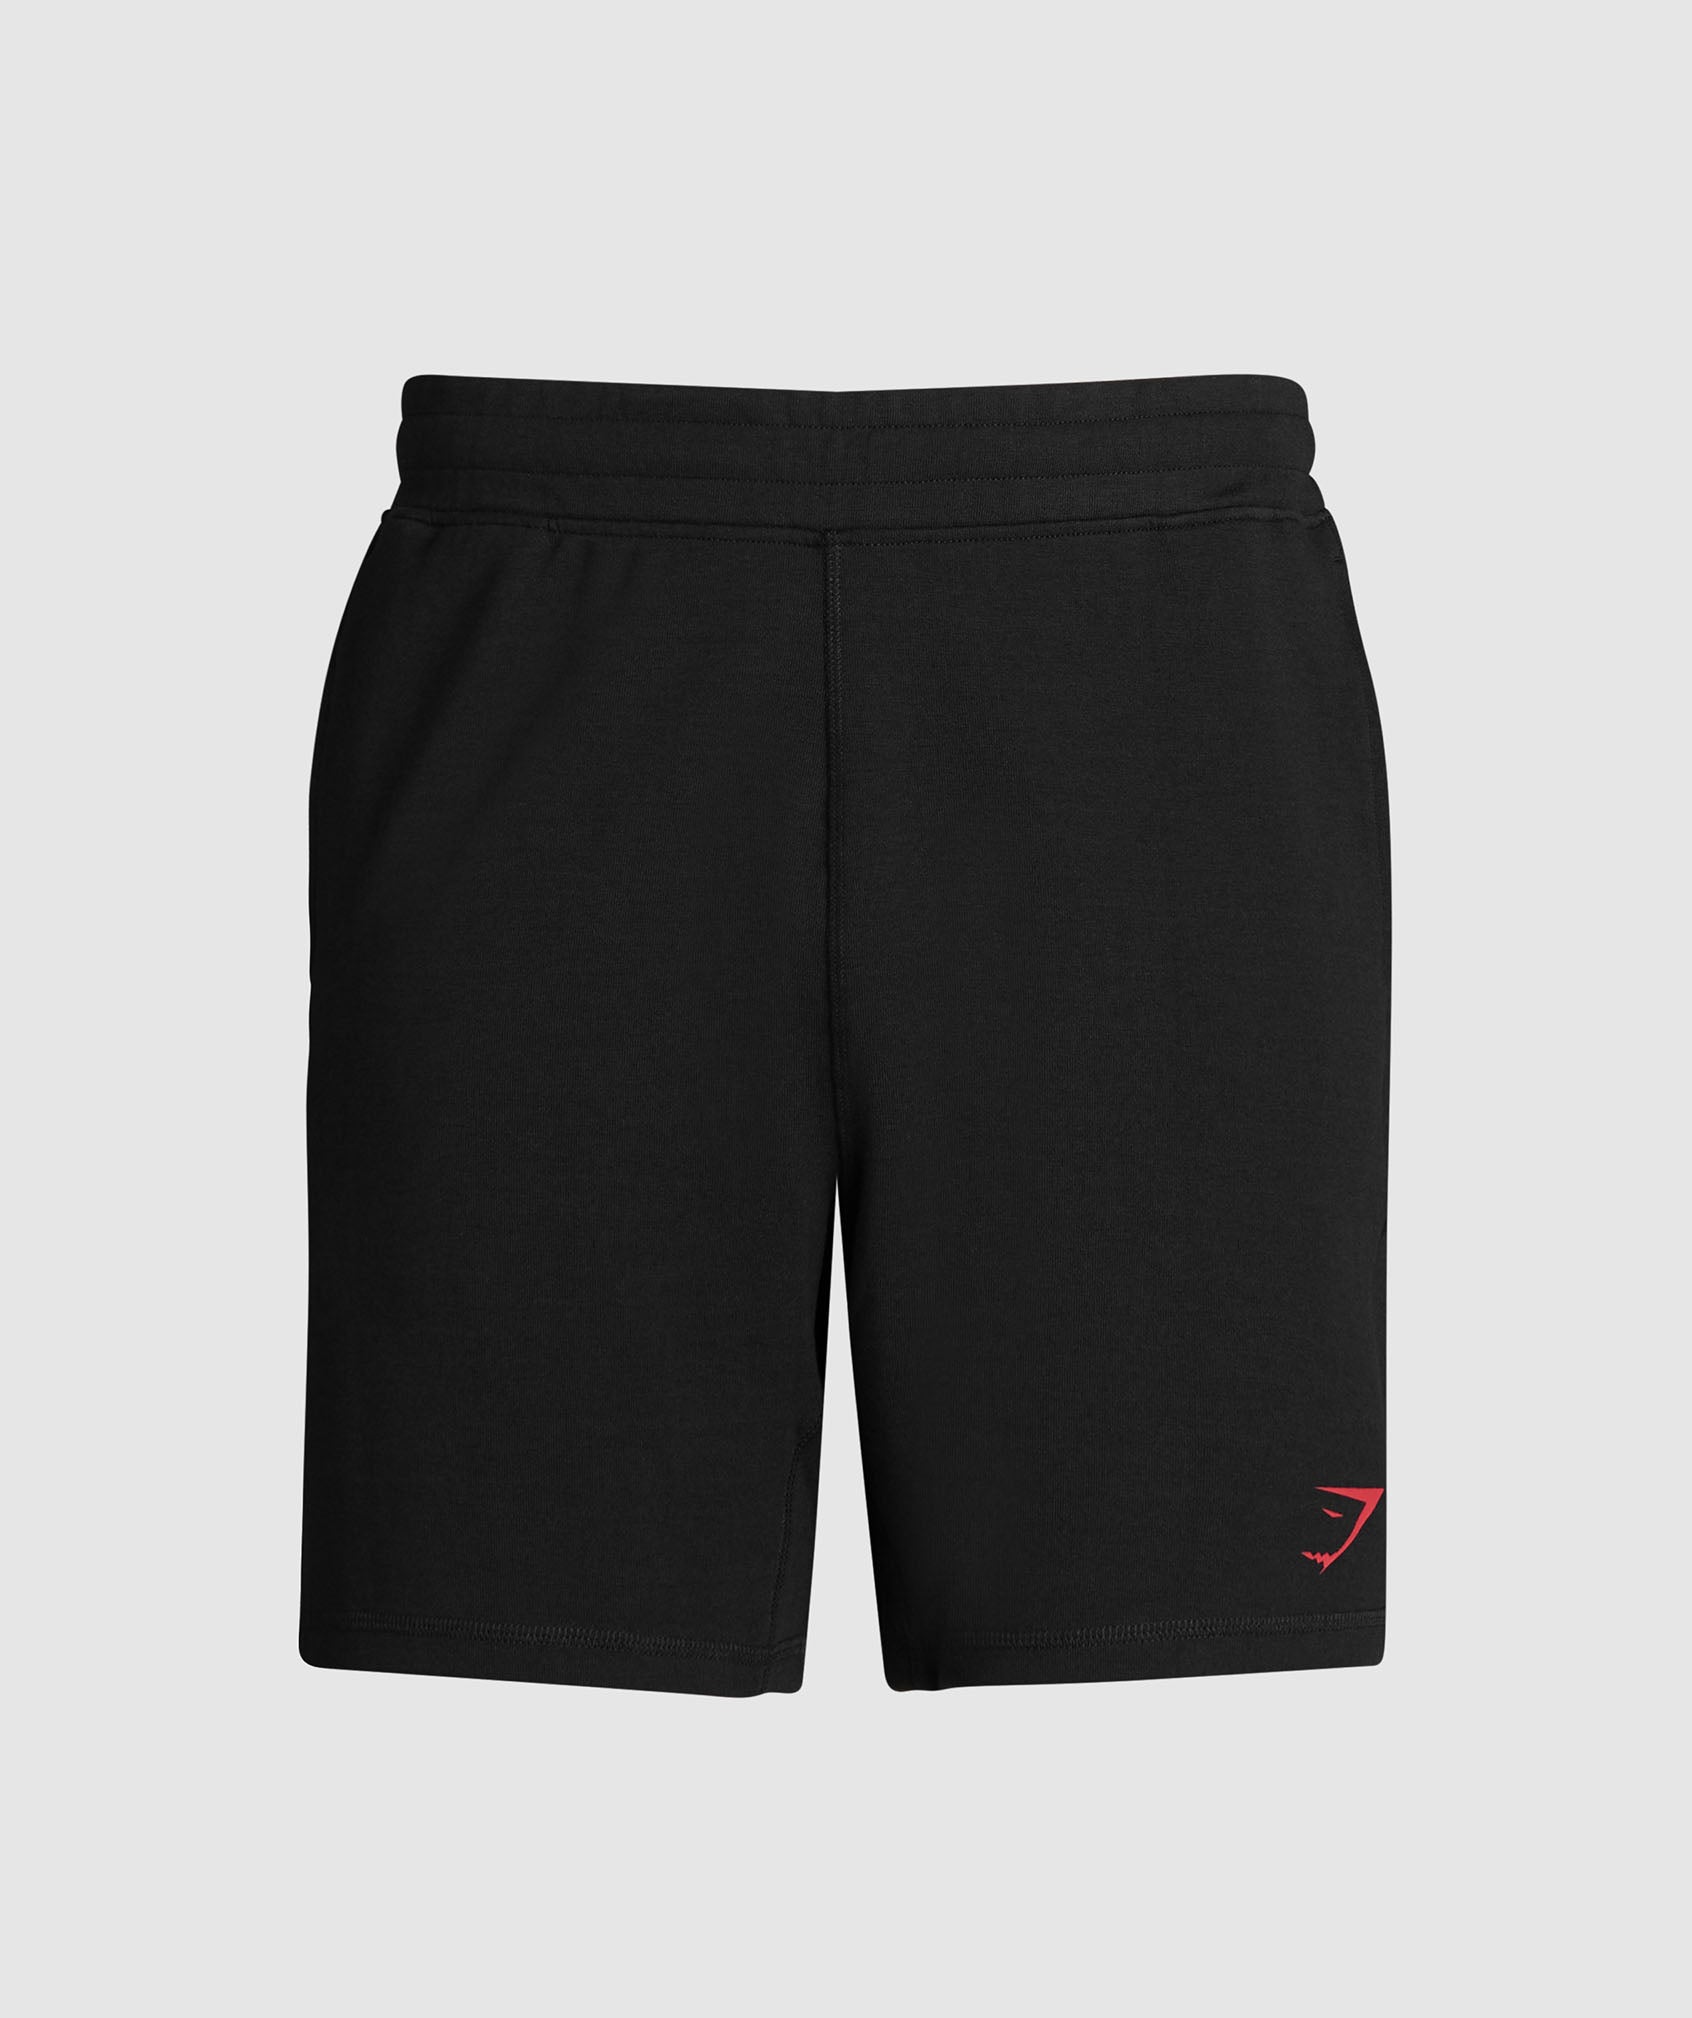 Impact Shorts in Black/Vivid Red - view 8